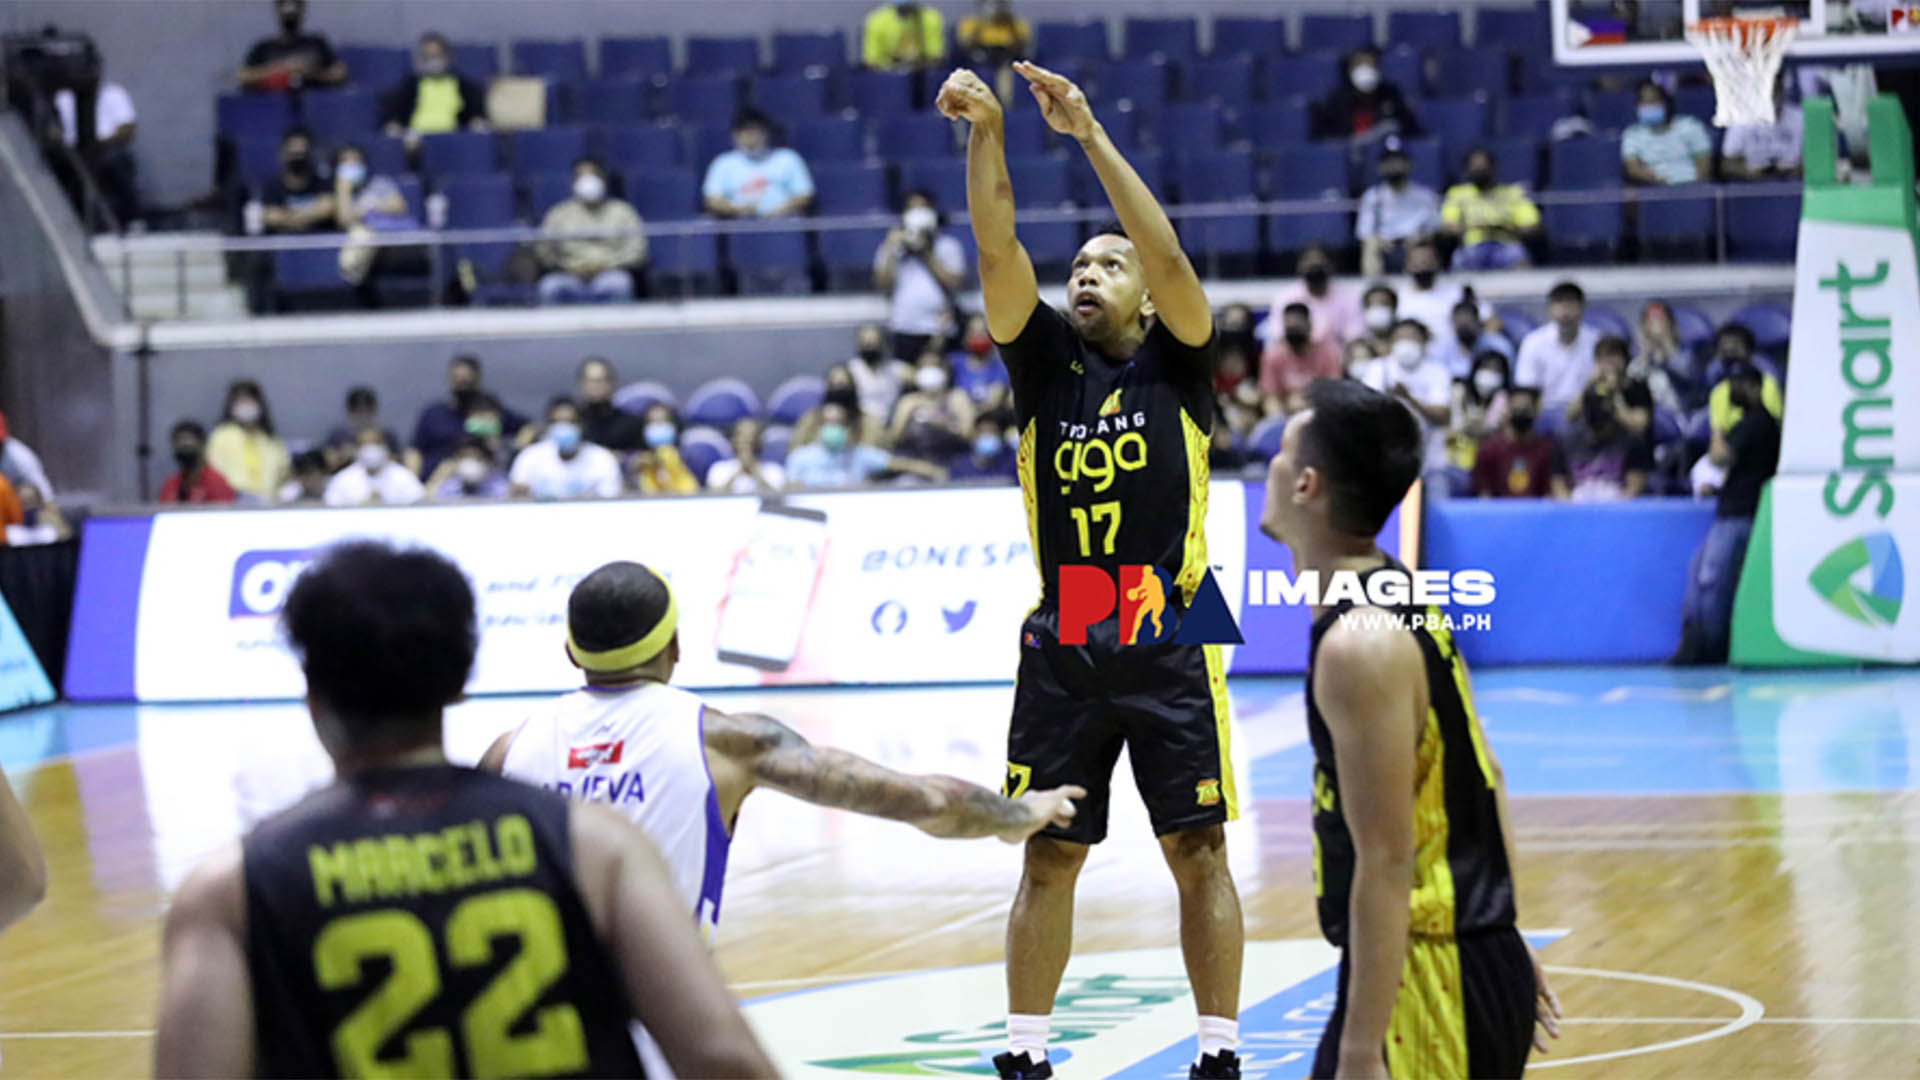 This week in Philippine basketball: Jayson Castro continues to